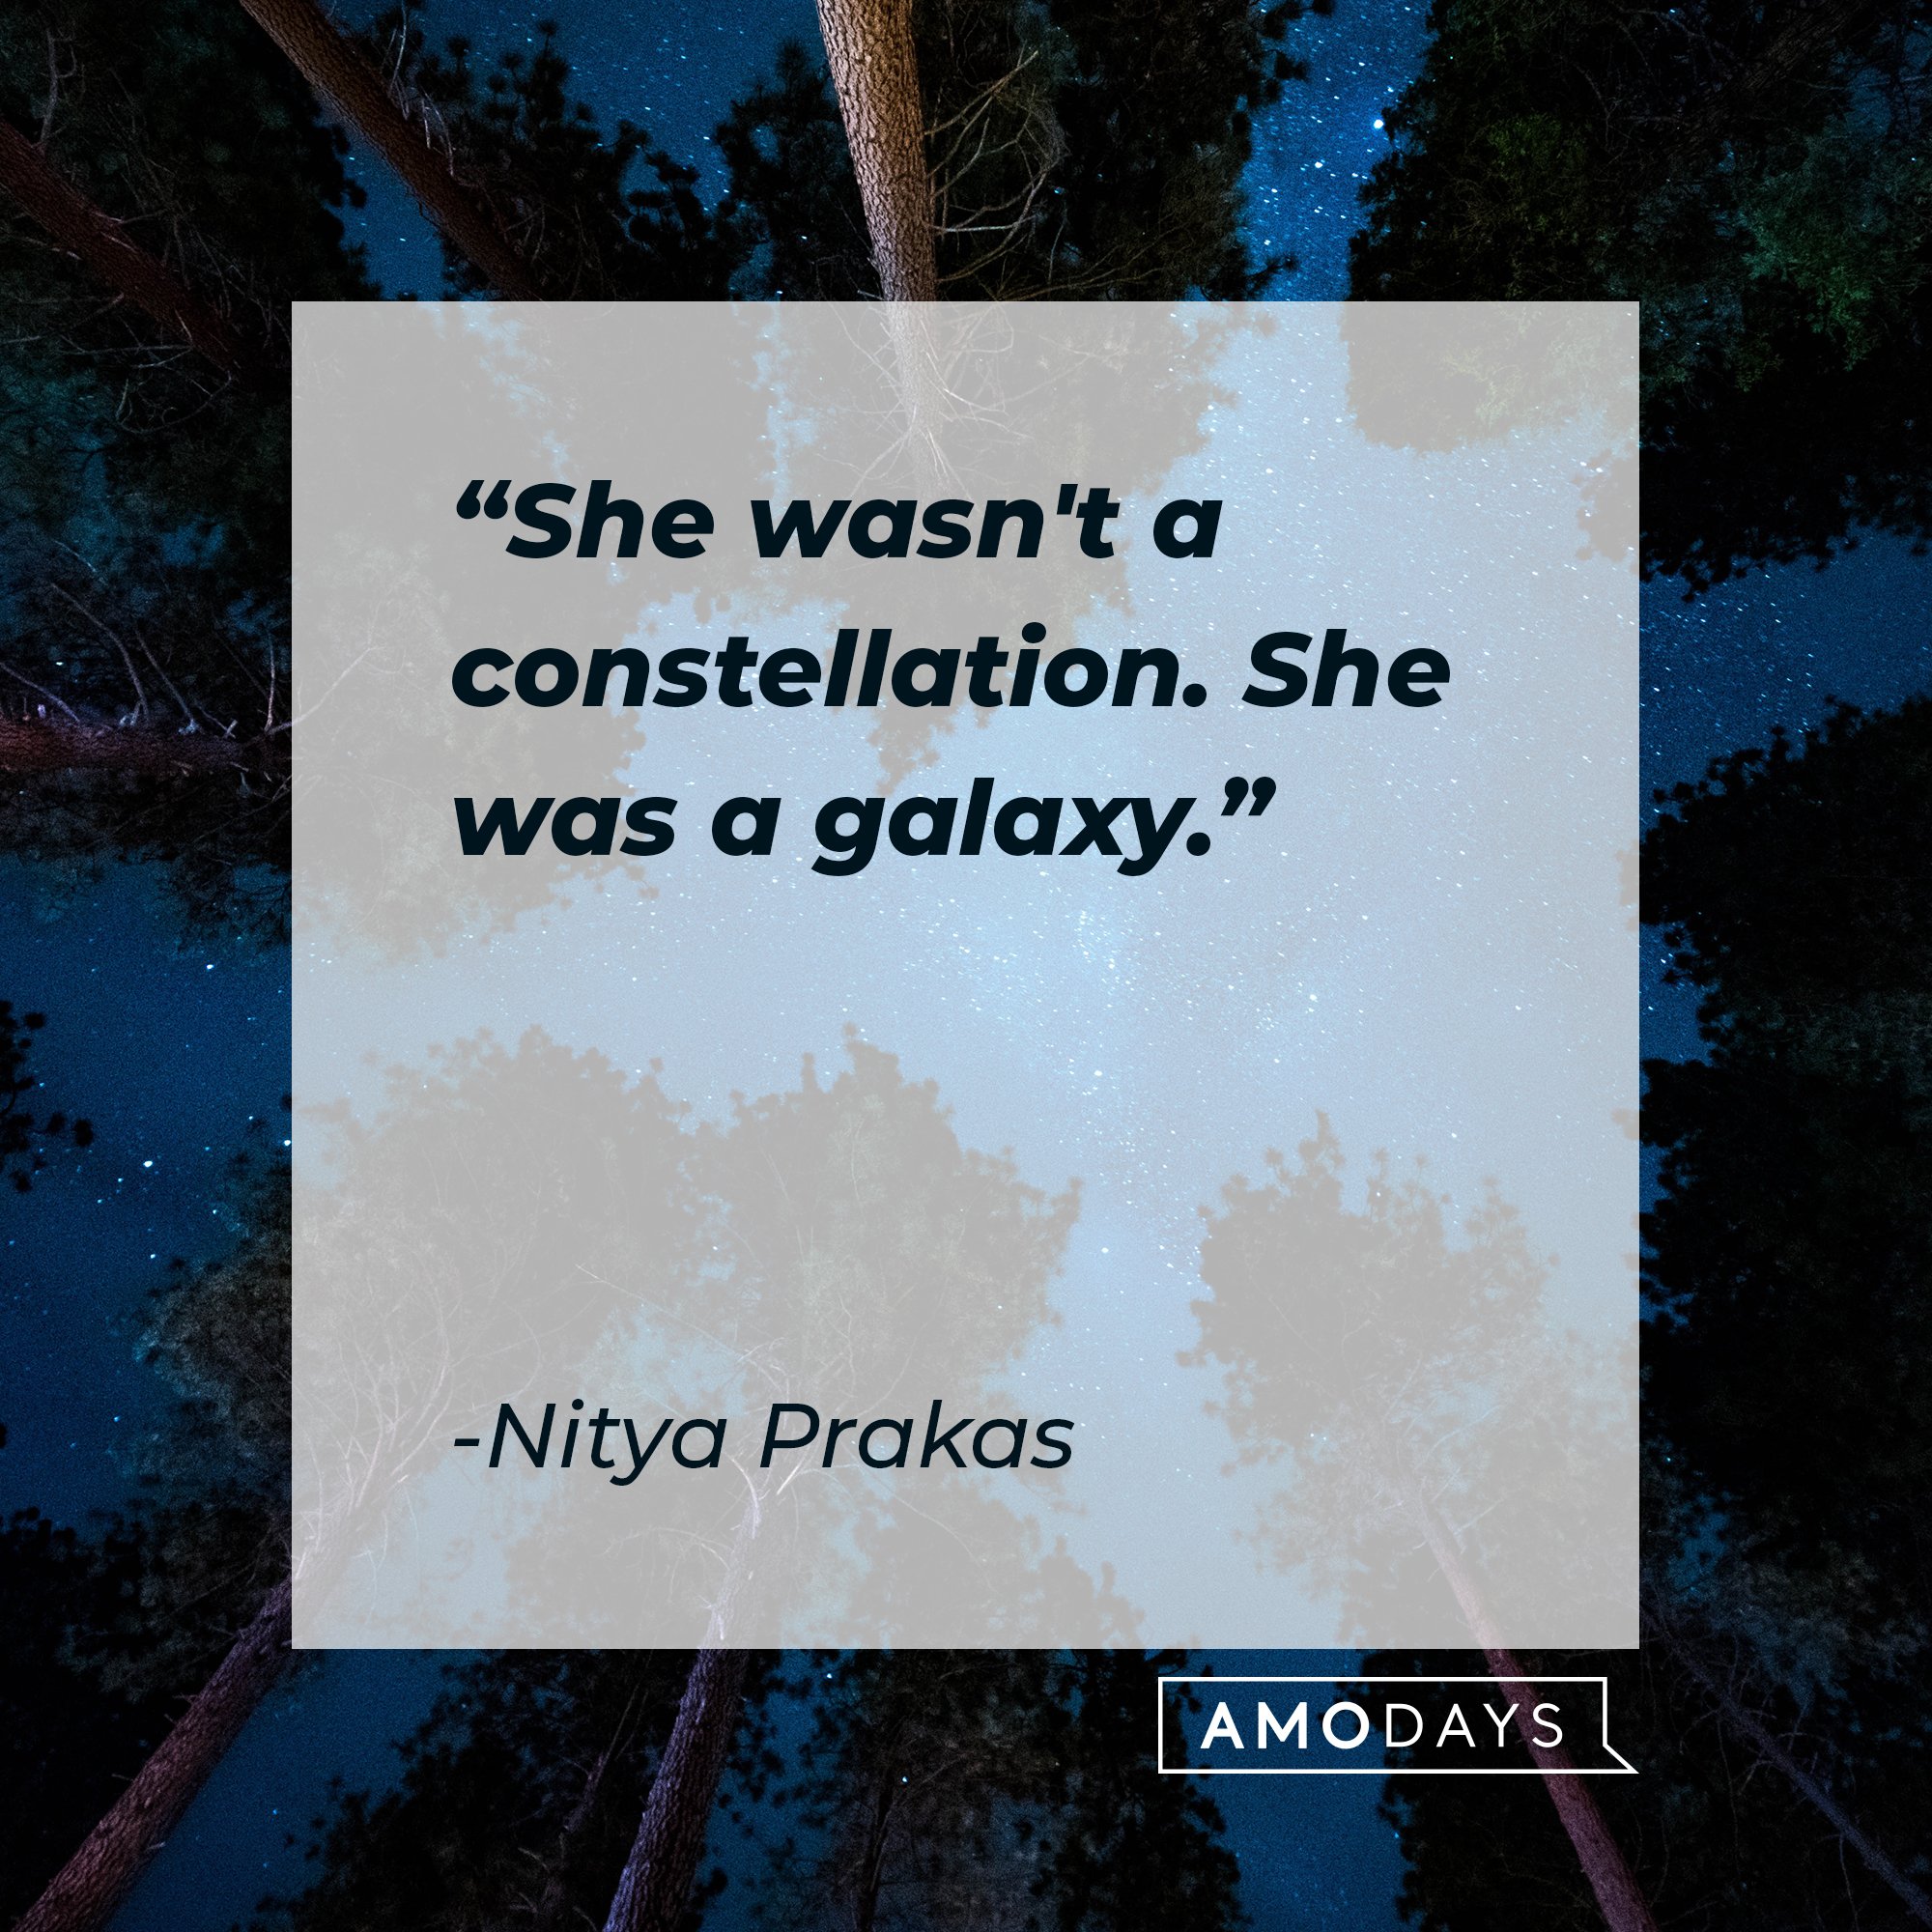 Nitya Prakas’s quote: "She wasn't a constellation. She was a galaxy.”  | Image: AmoDays